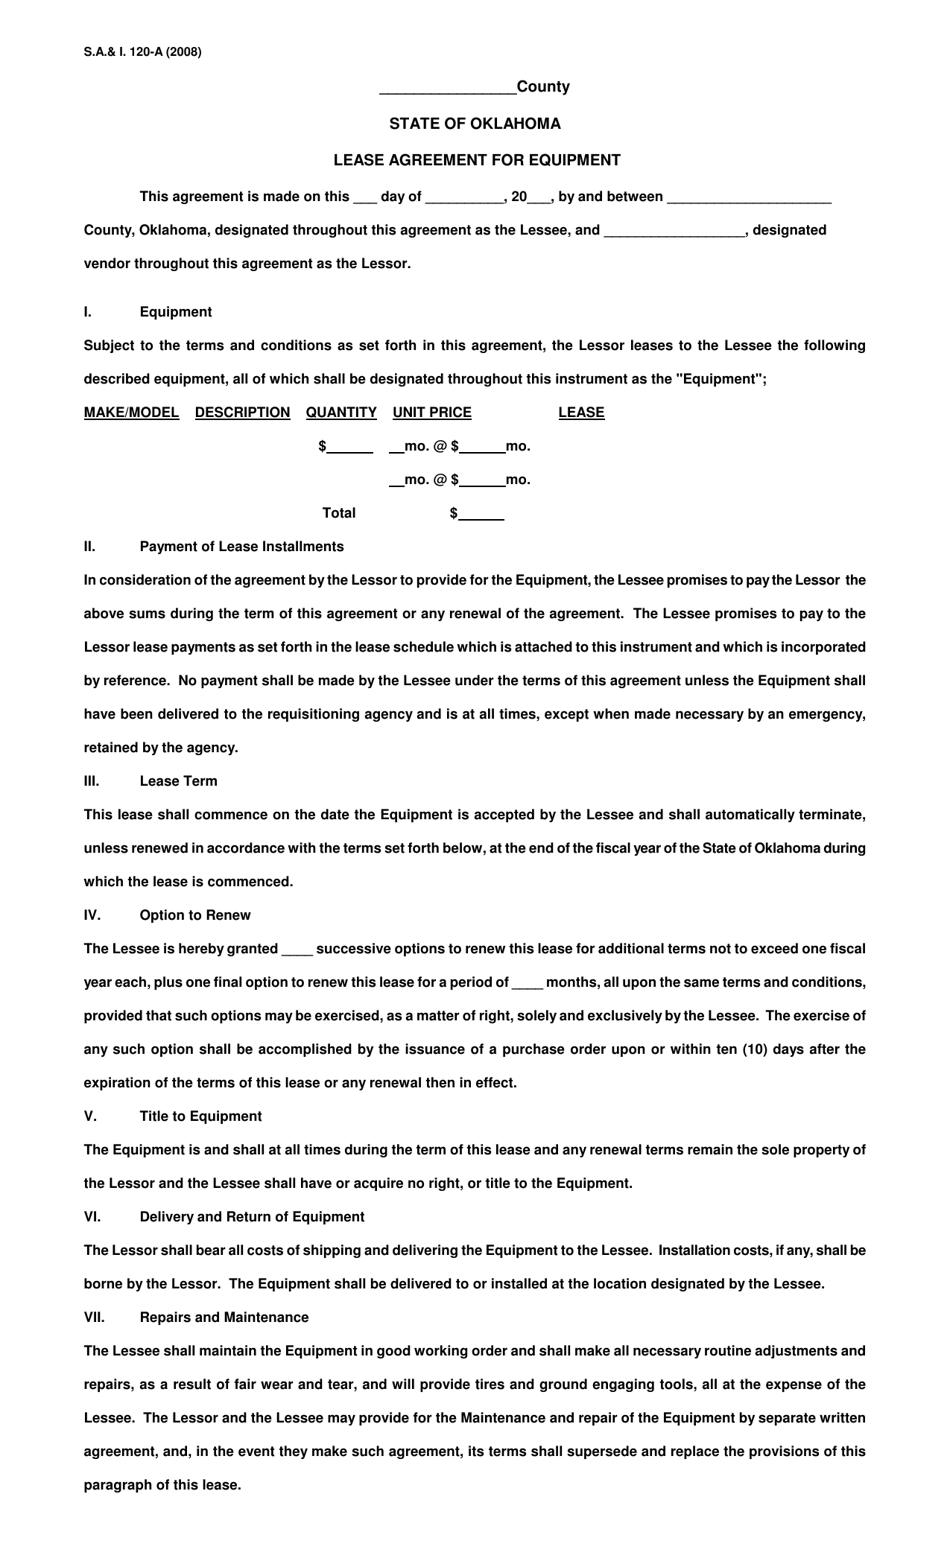 Form S.A. I.120-A Lease Agreement for Equipment - Oklahoma, Page 1